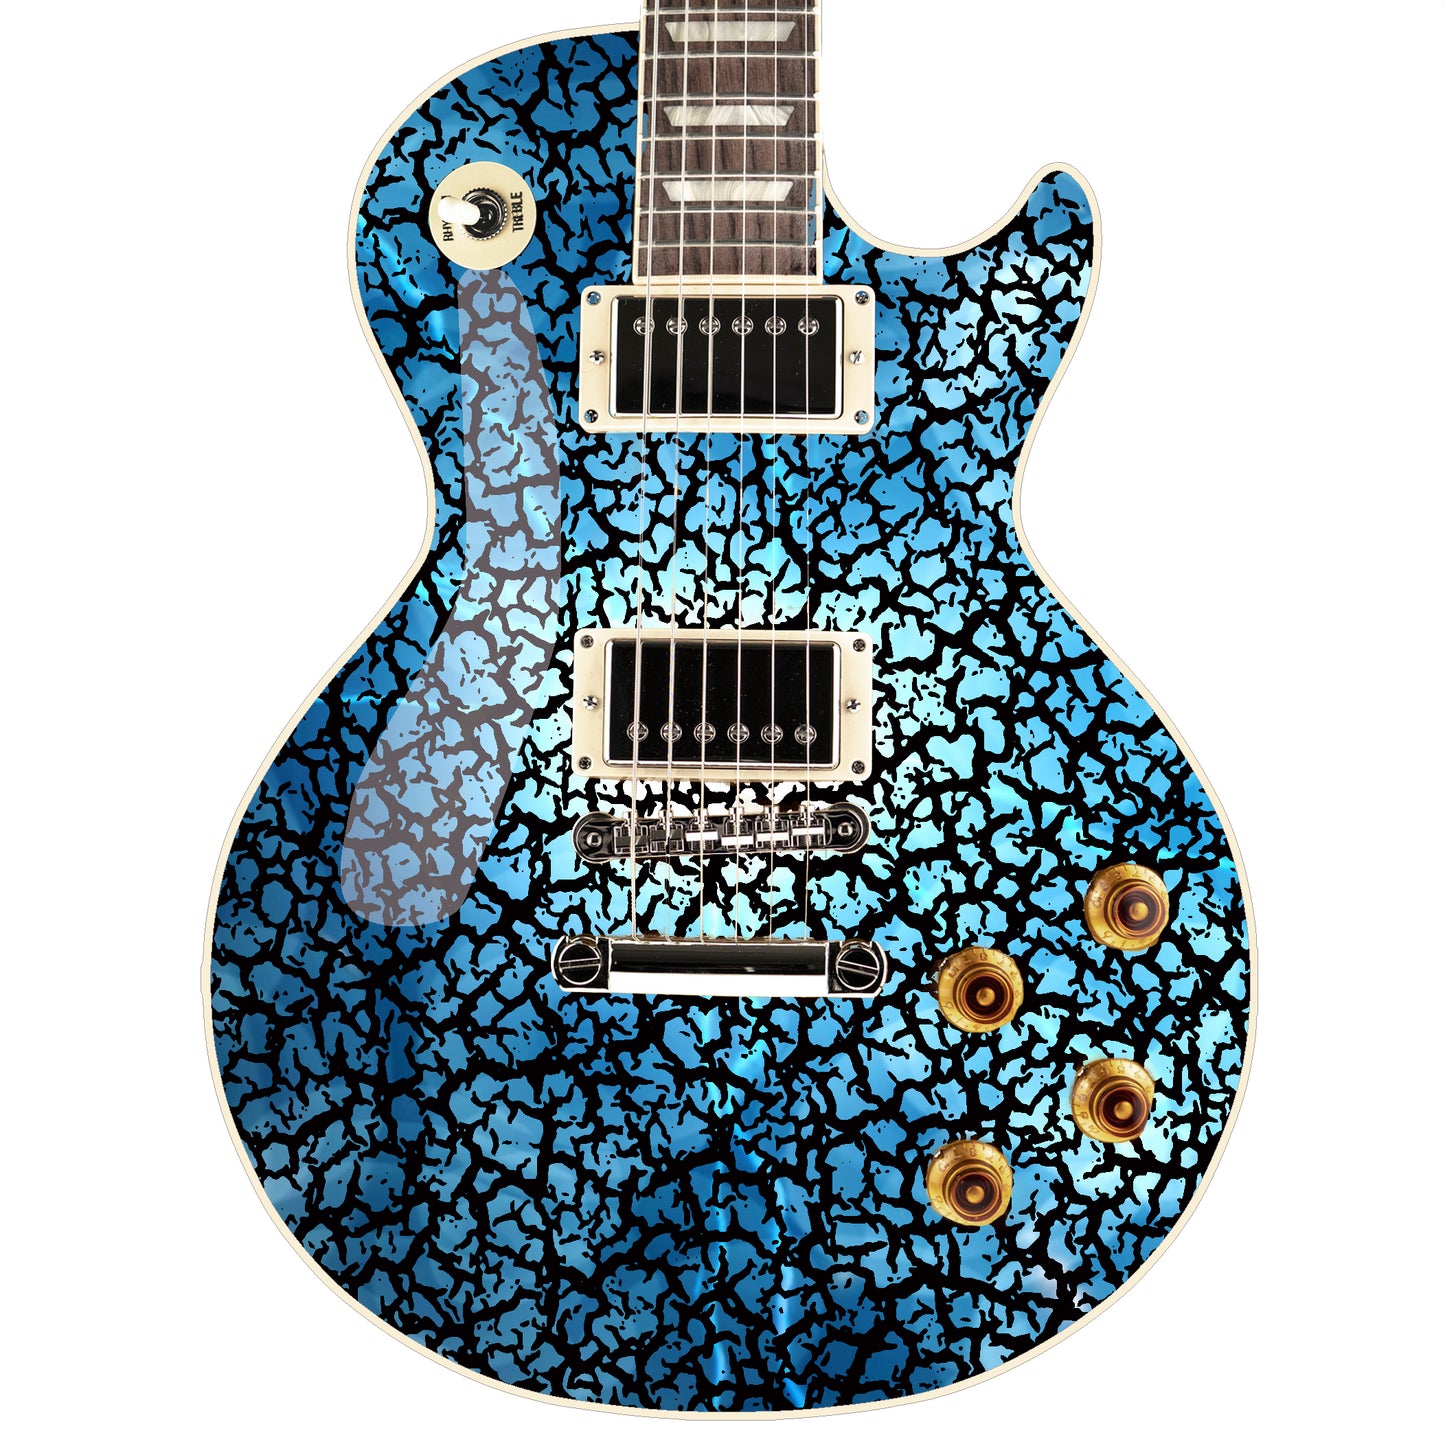 The Crackle Selection Guitar/Bass Vinyl Skin Wrap Decal Sticker Skin. Night Sky  GS202